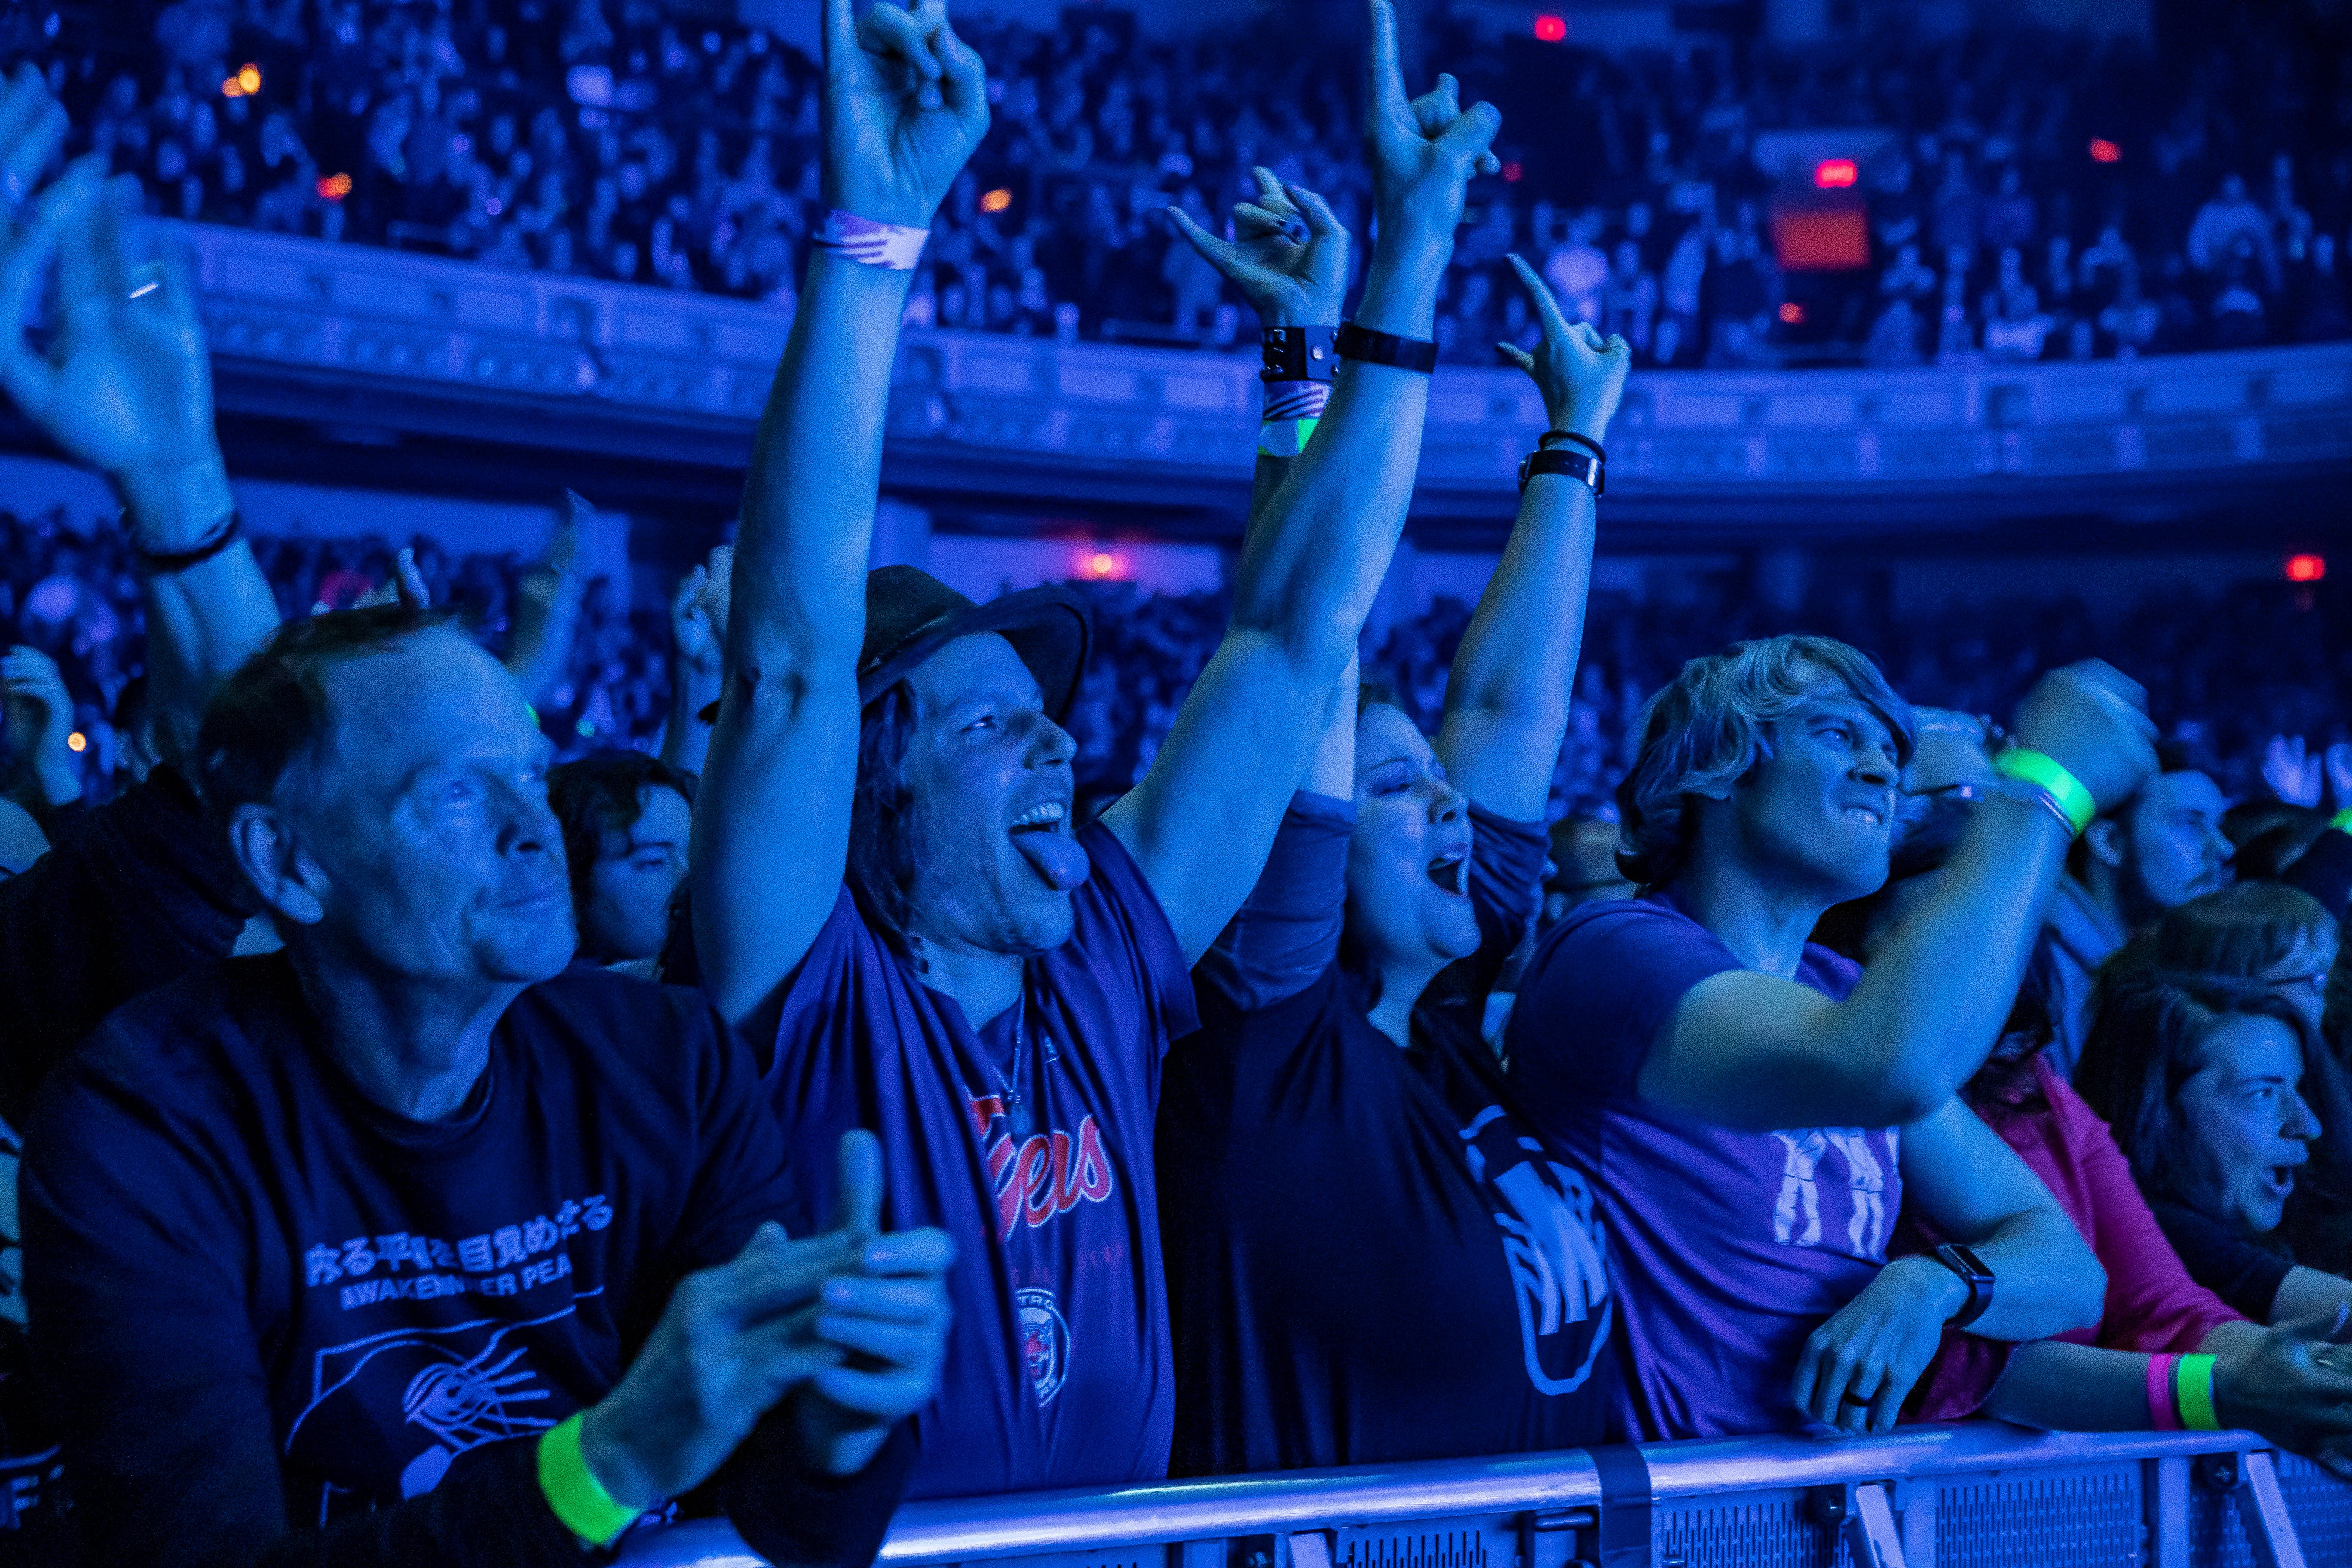 Some fans rocking to Jack White during the bands Supply Chains Issues Tour at the Masonic Temple on April 8, 2022 in Detroit, Michigan.